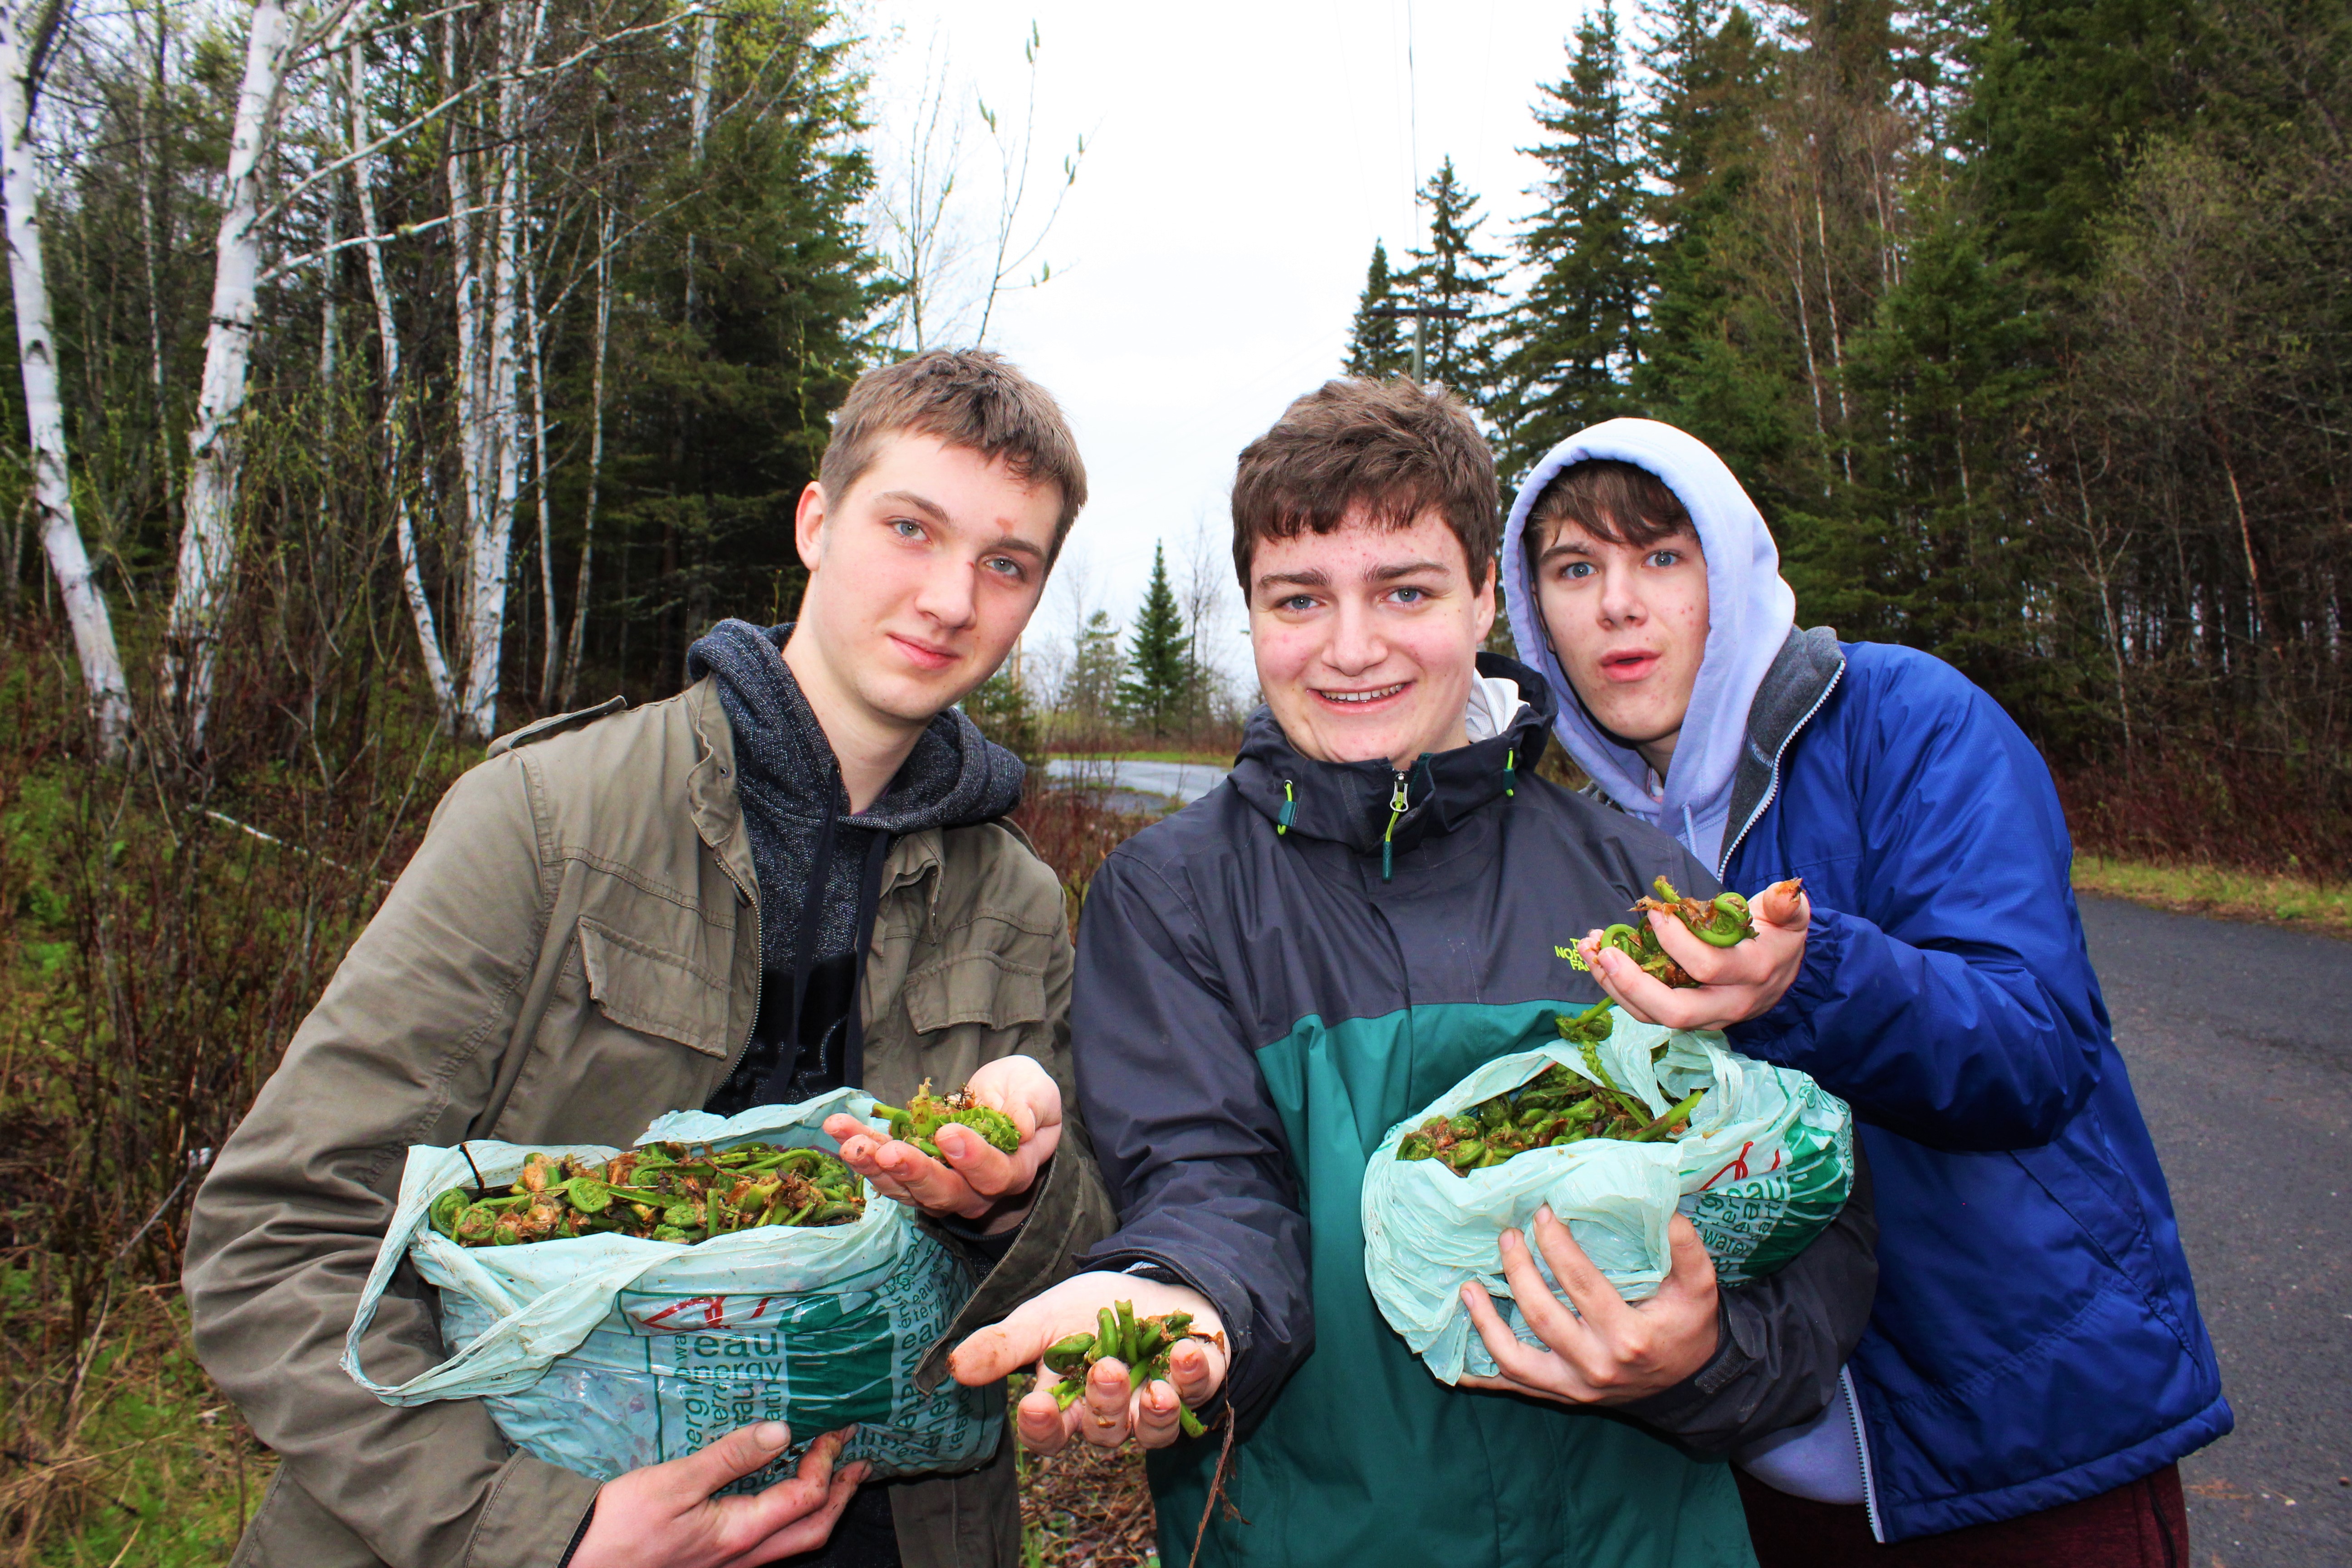 Three youth holding up bags of fiddleheads